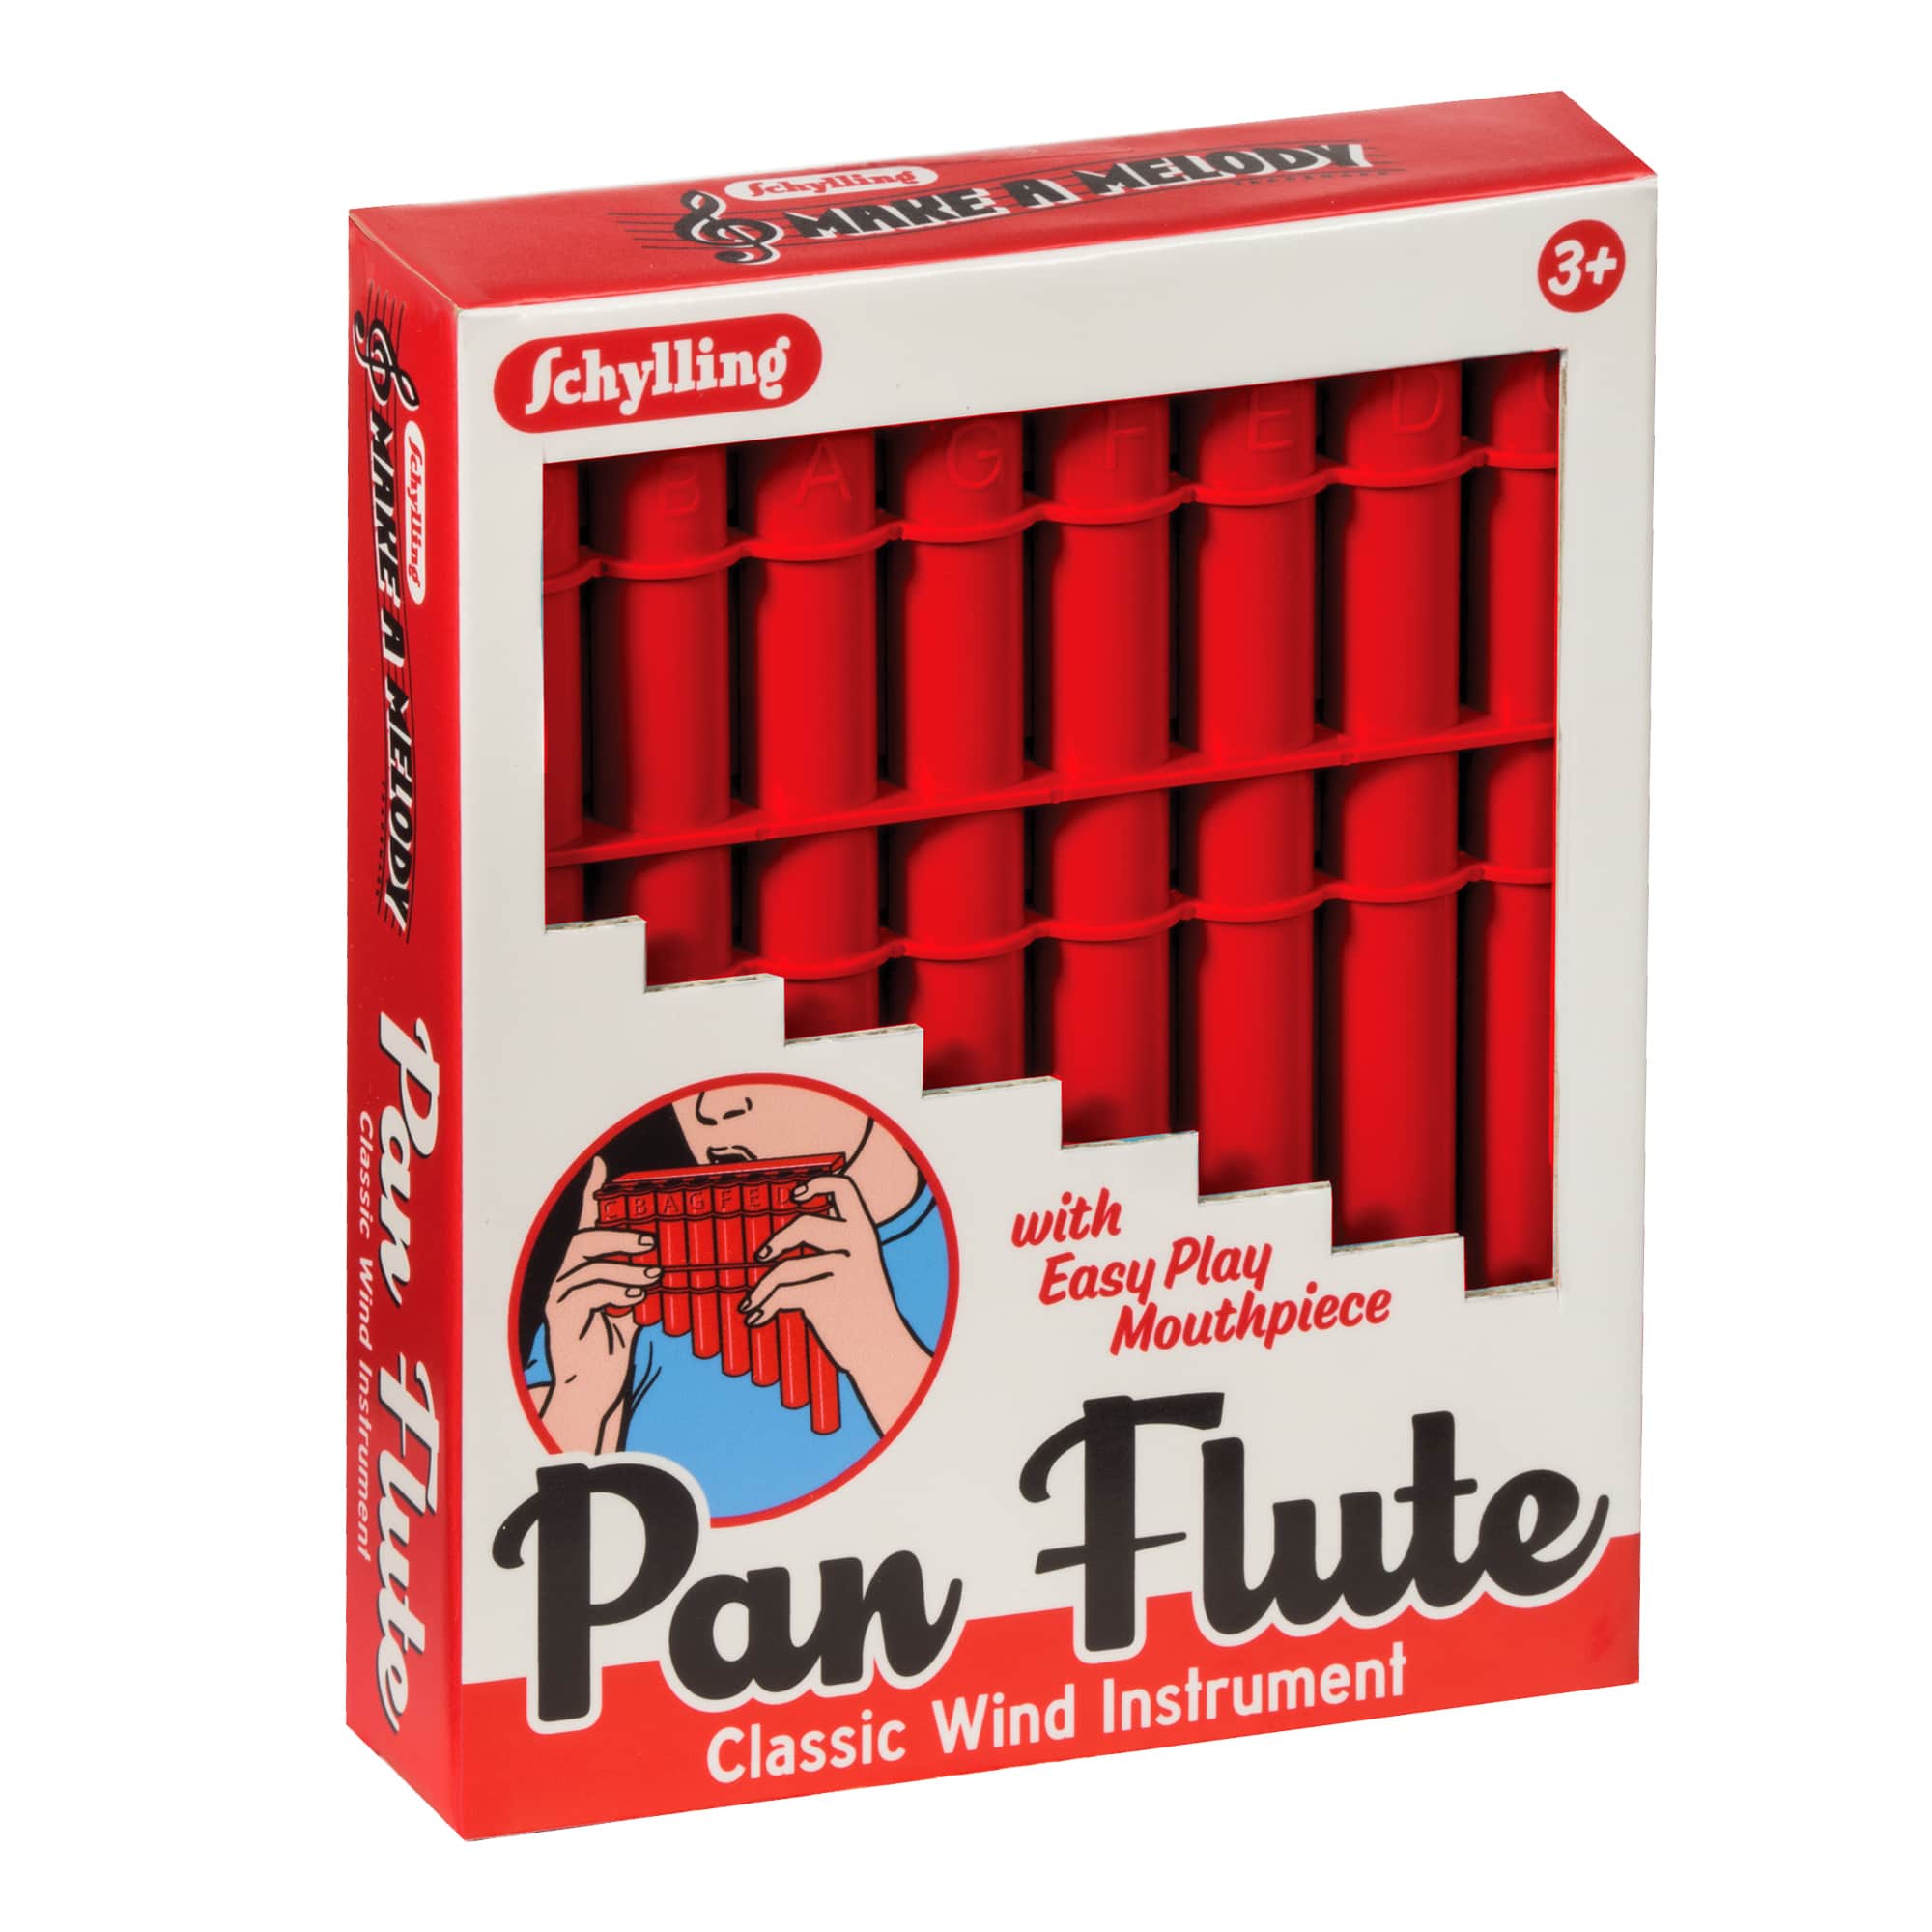 Pan Flute Classic Wind Instrument Is Designed Just For Kids – Assorted Colors